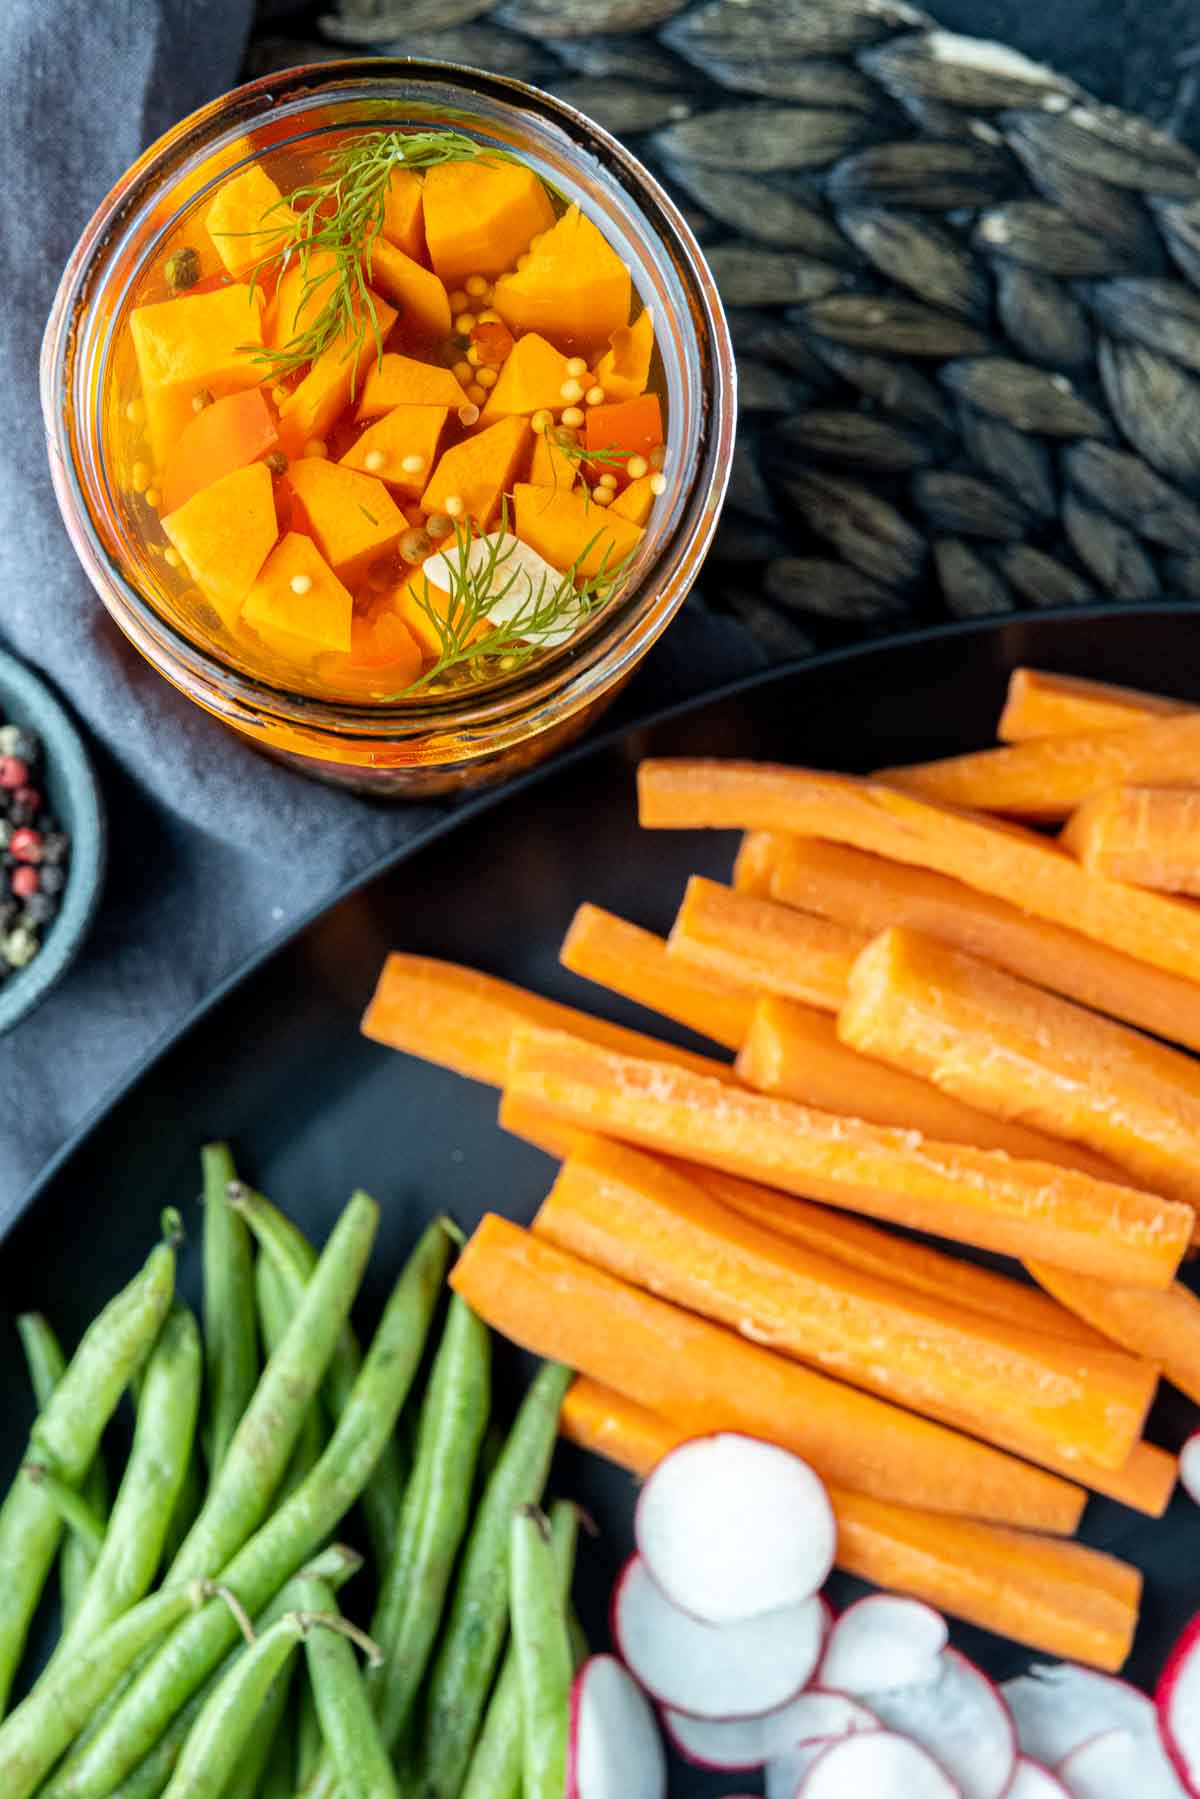 jar of Pickled Carrots with carrot sticks on a plate